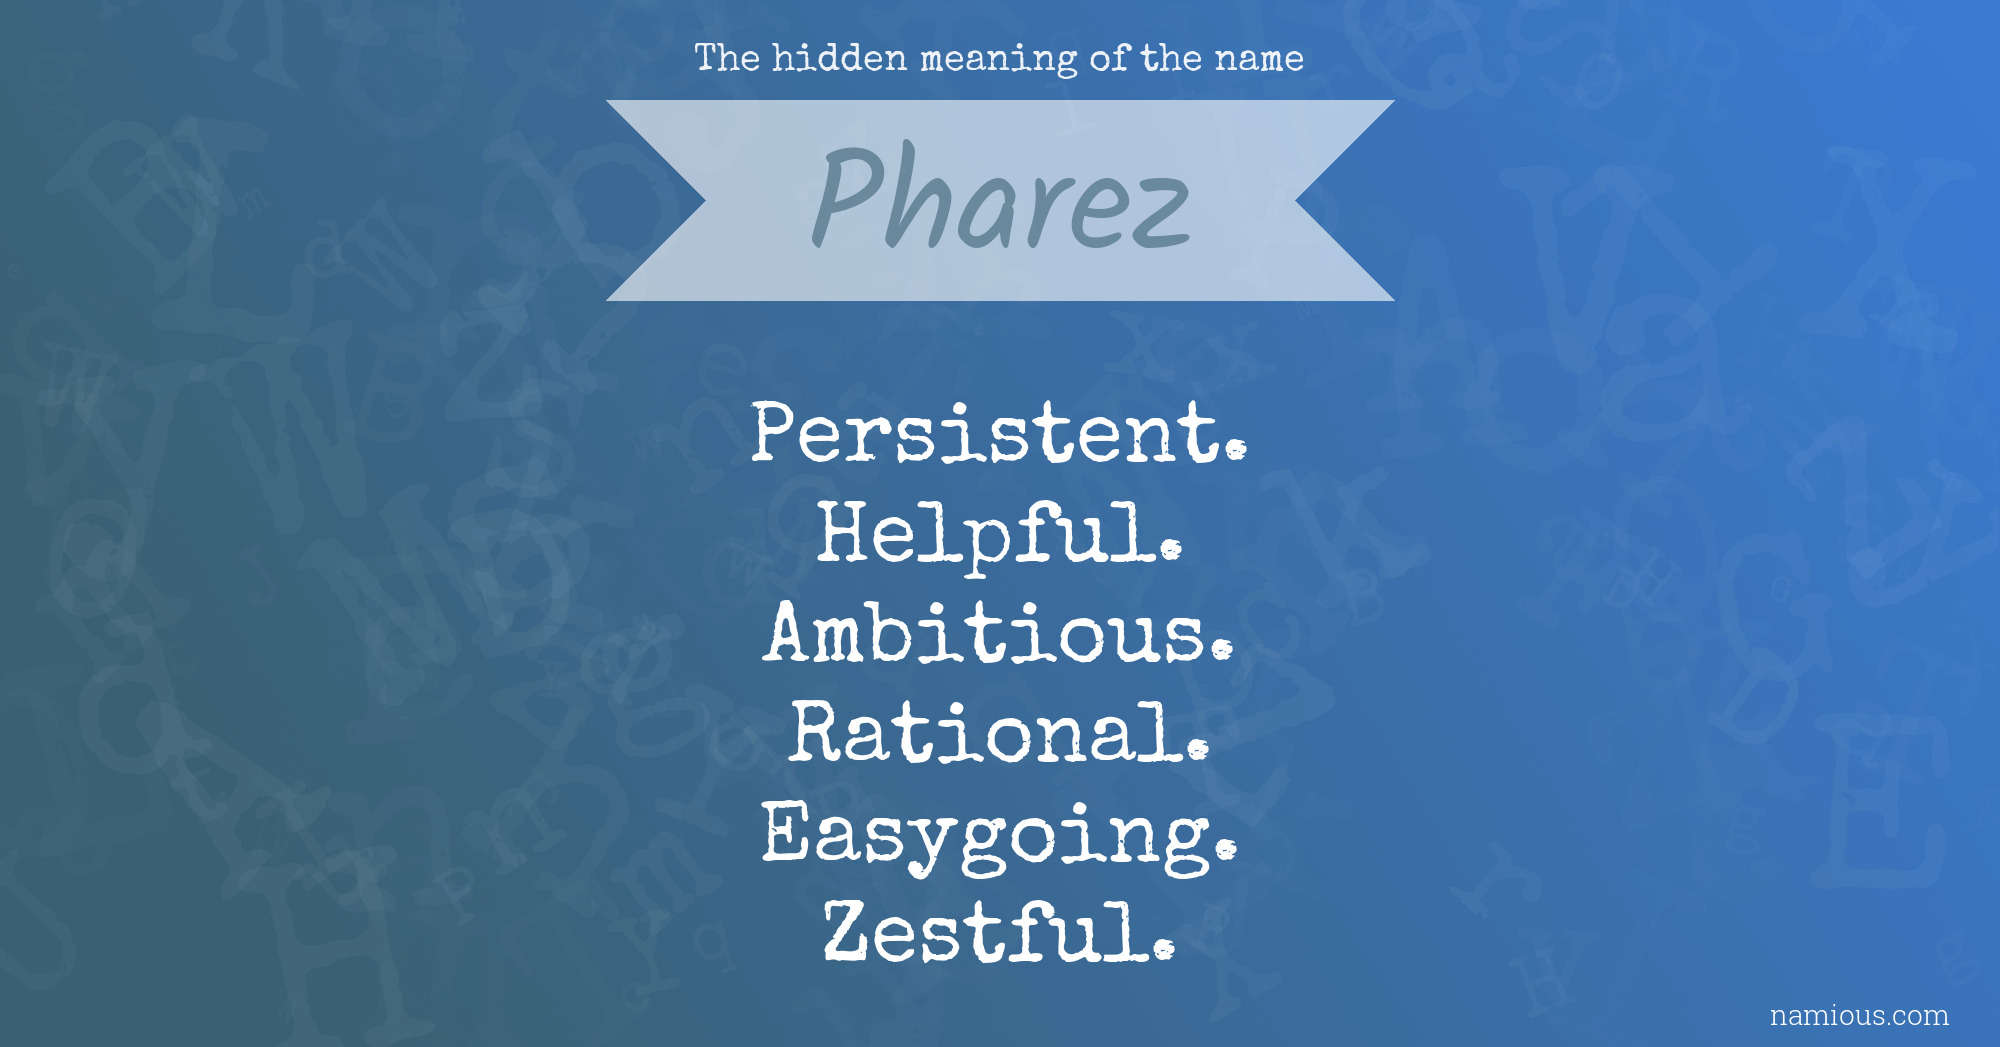 The hidden meaning of the name Pharez